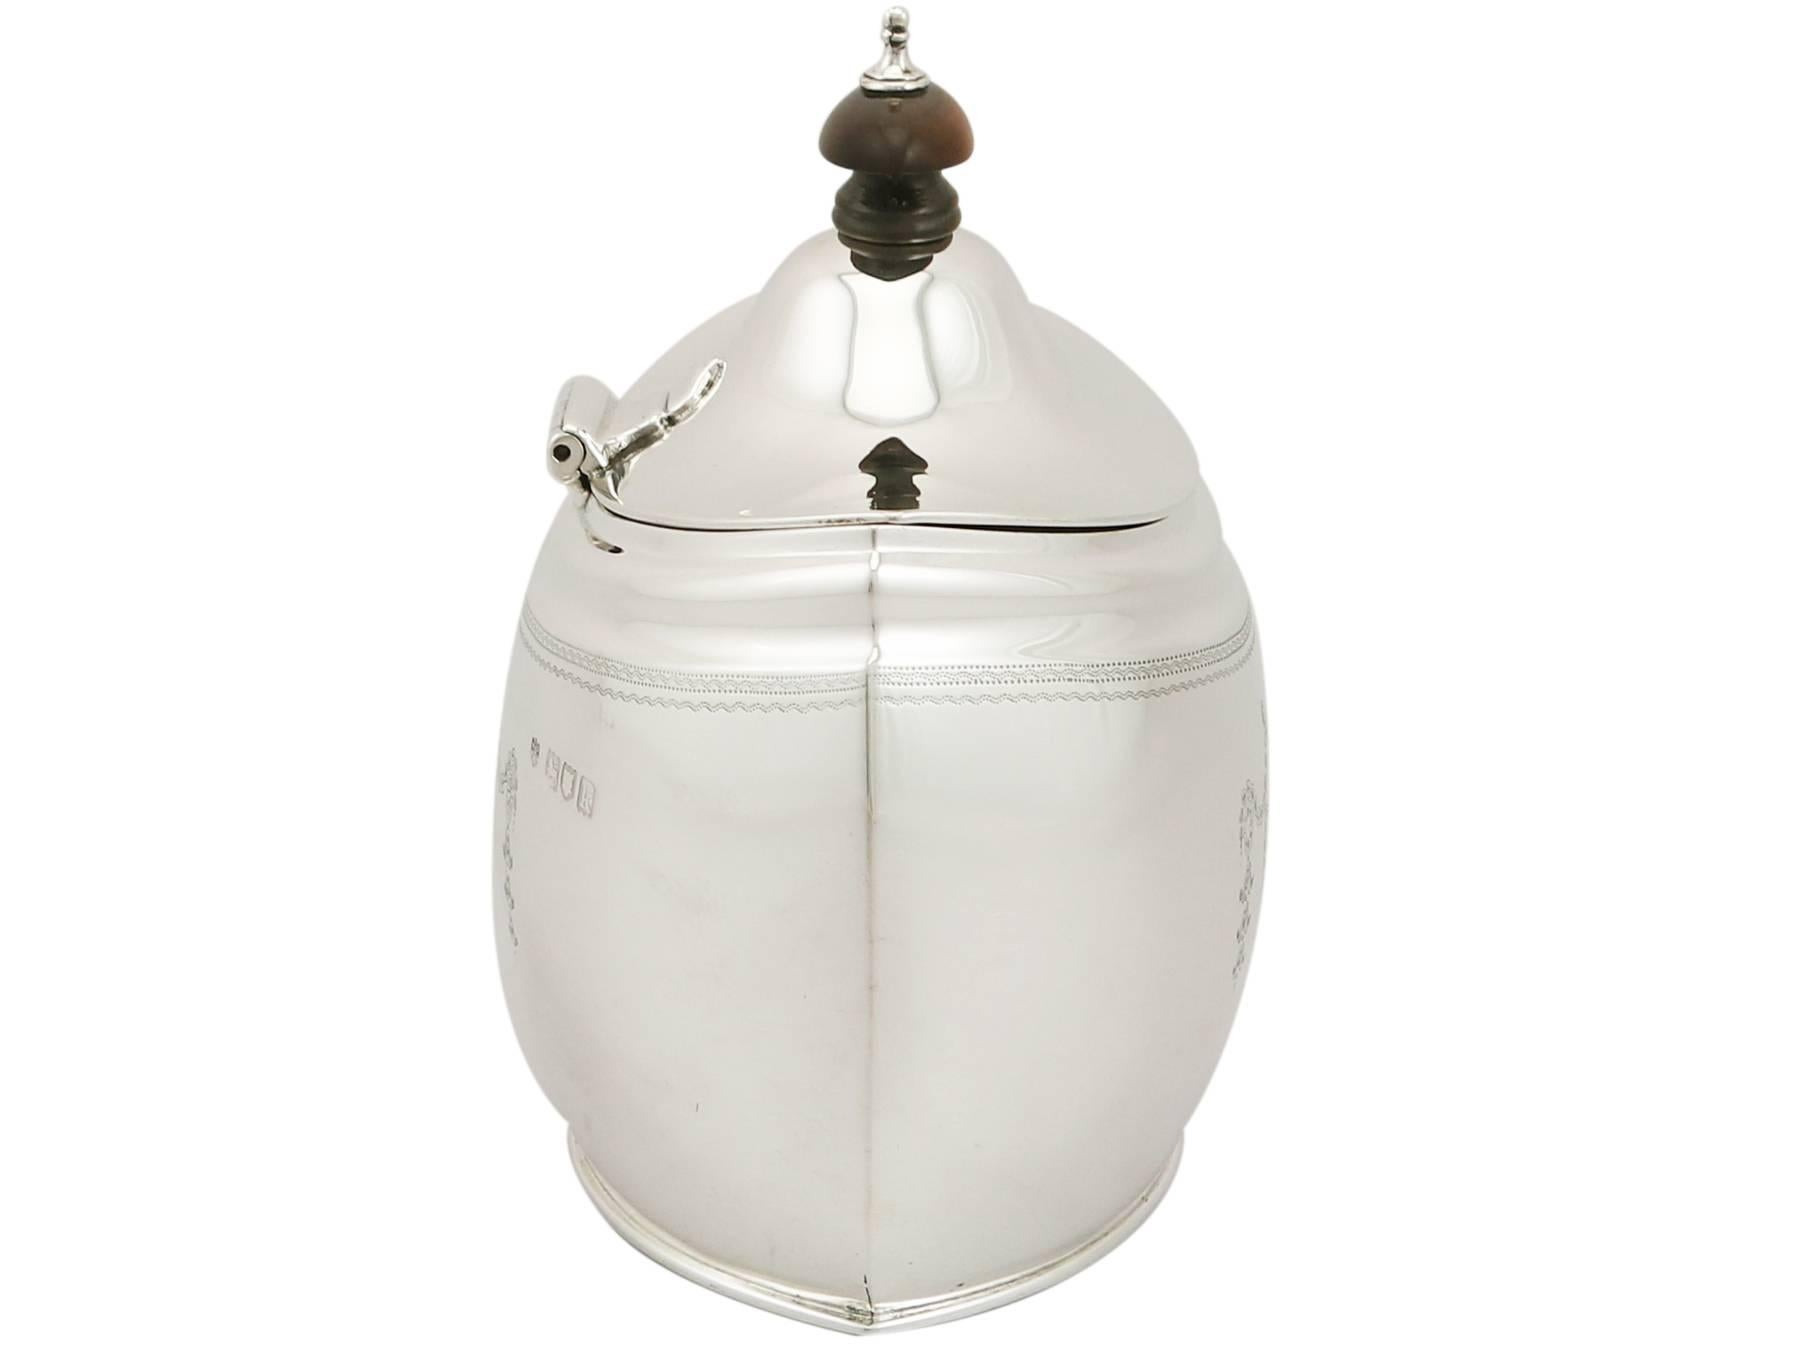 An exceptional, fine and impressive antique Edwardian English sterling silver tea caddy made by Edward Barnard & Sons Ltd; an addition to our silver teaware collection

This exceptional antique Edwardian sterling silver tea caddy has a plain oval